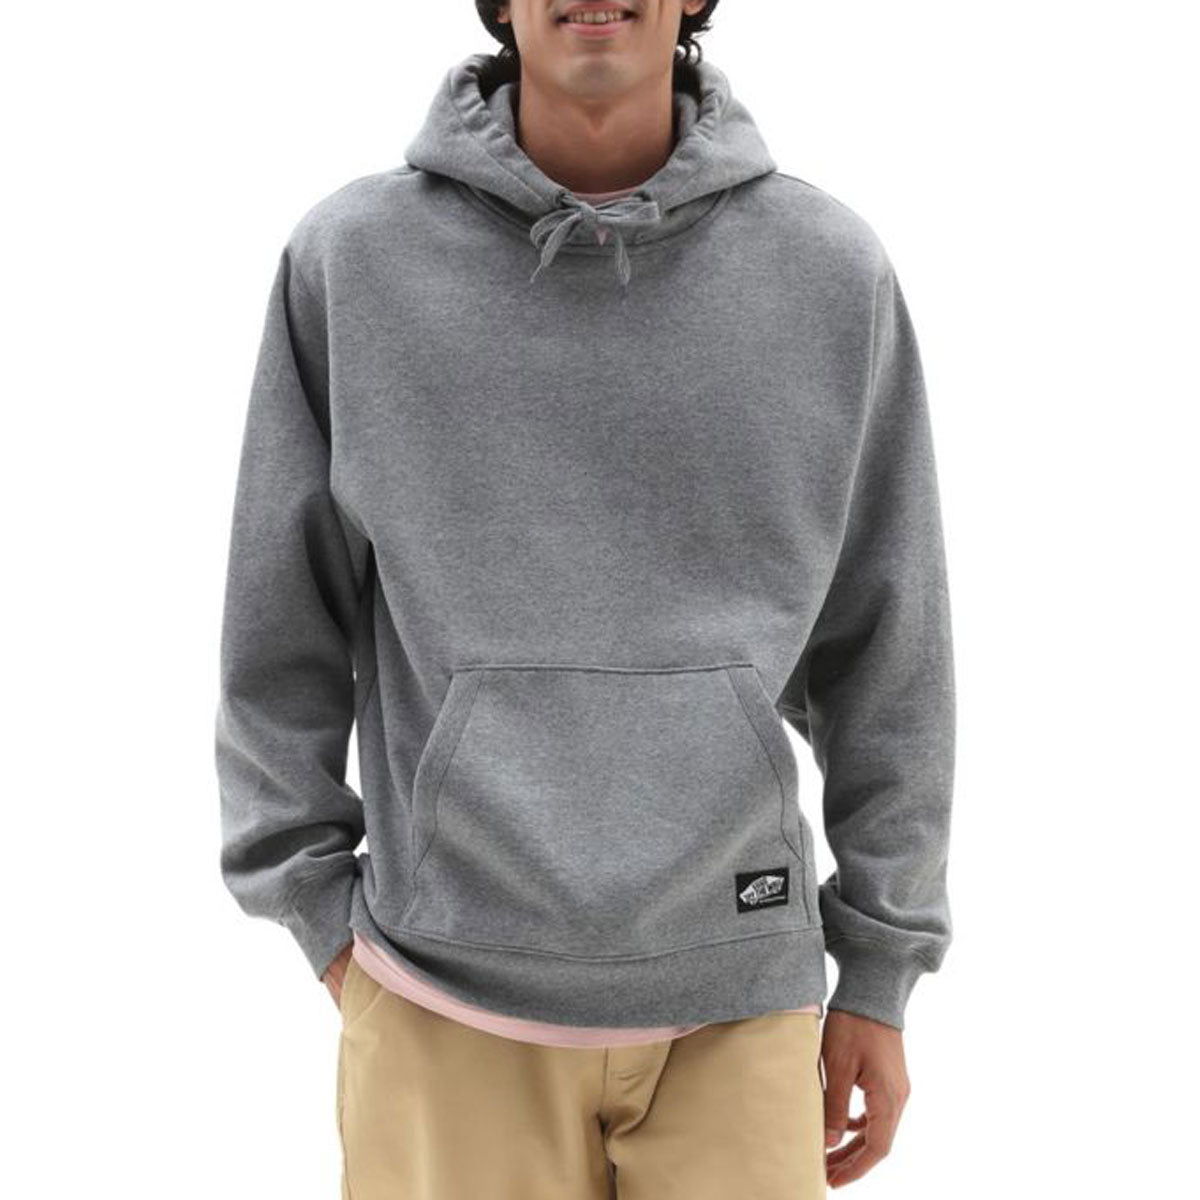 Vans Skate Classics Patch Hoodie - Cement Heather image 2